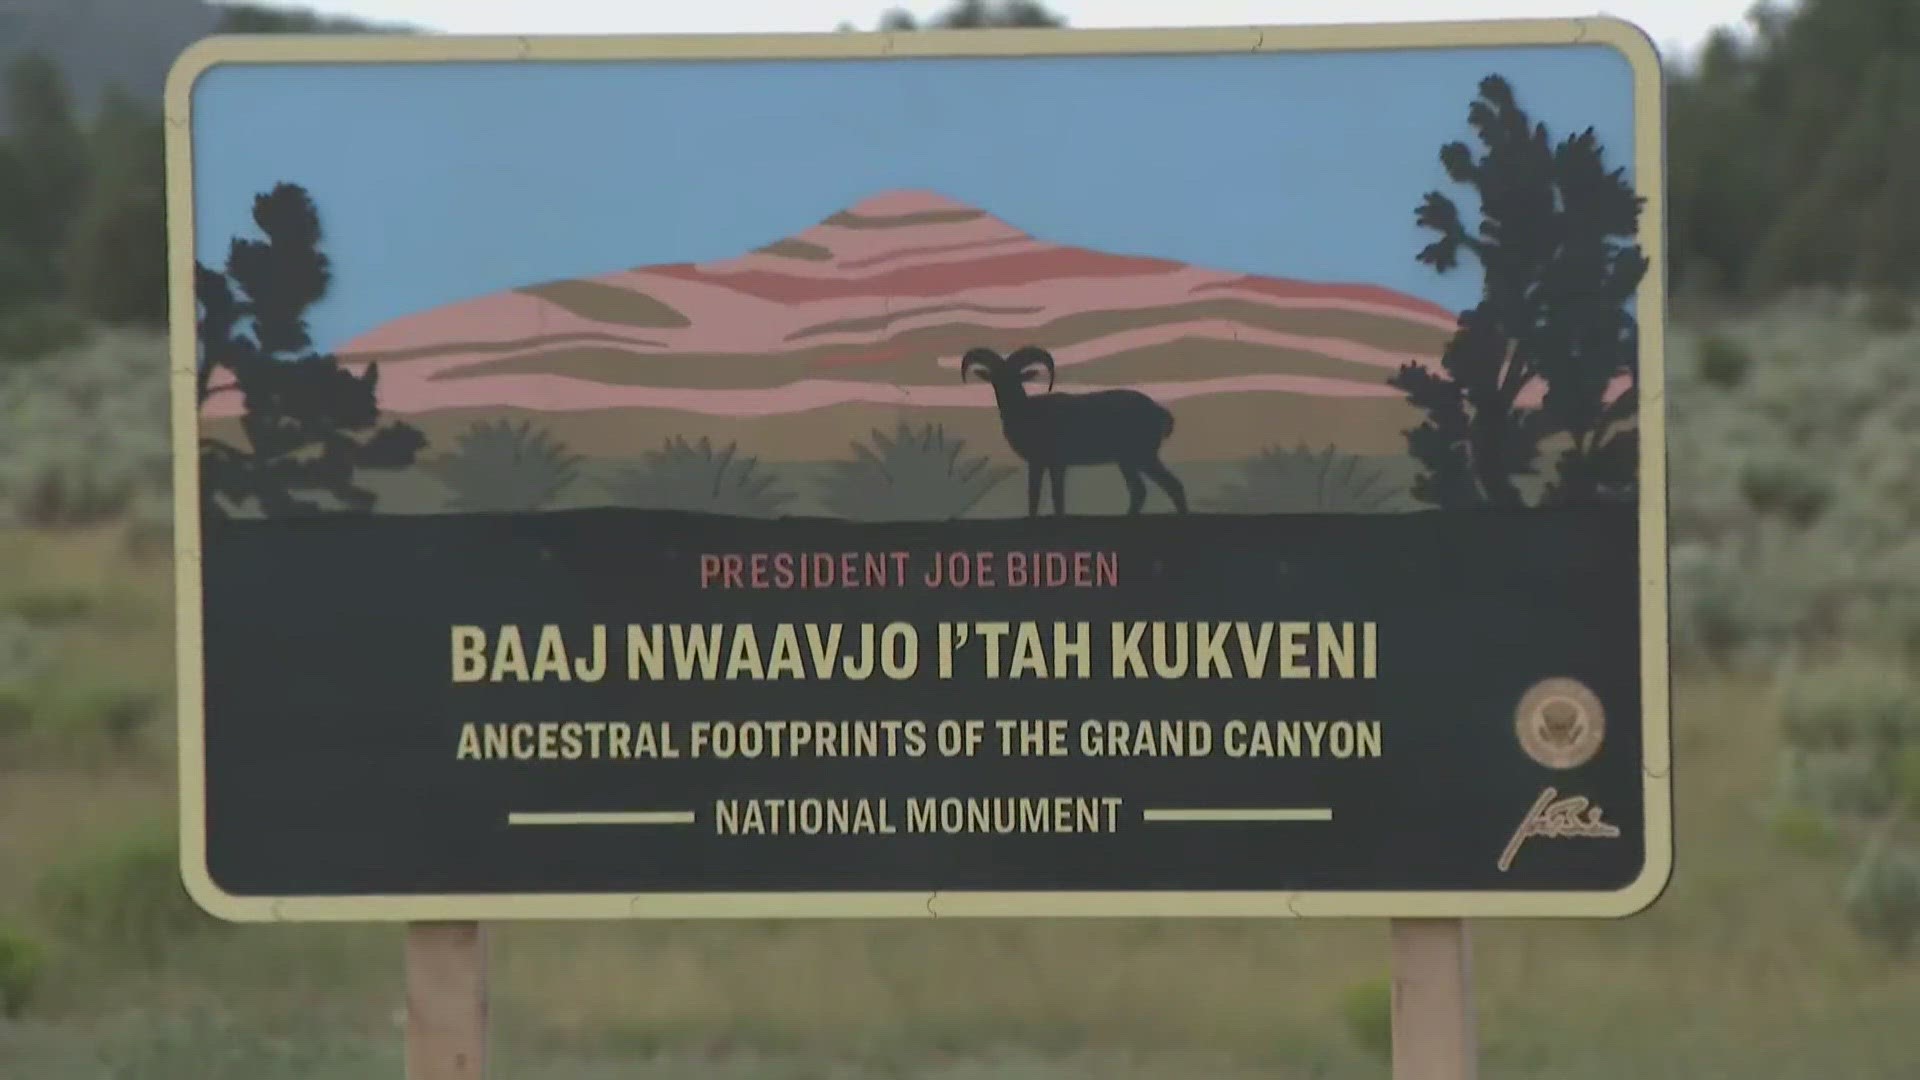 The Baaj Nwaavjo I’tah Kukveni Grand Canyon National Monument aims to protect swaths of land from mining and development while also expanding tribal rights.